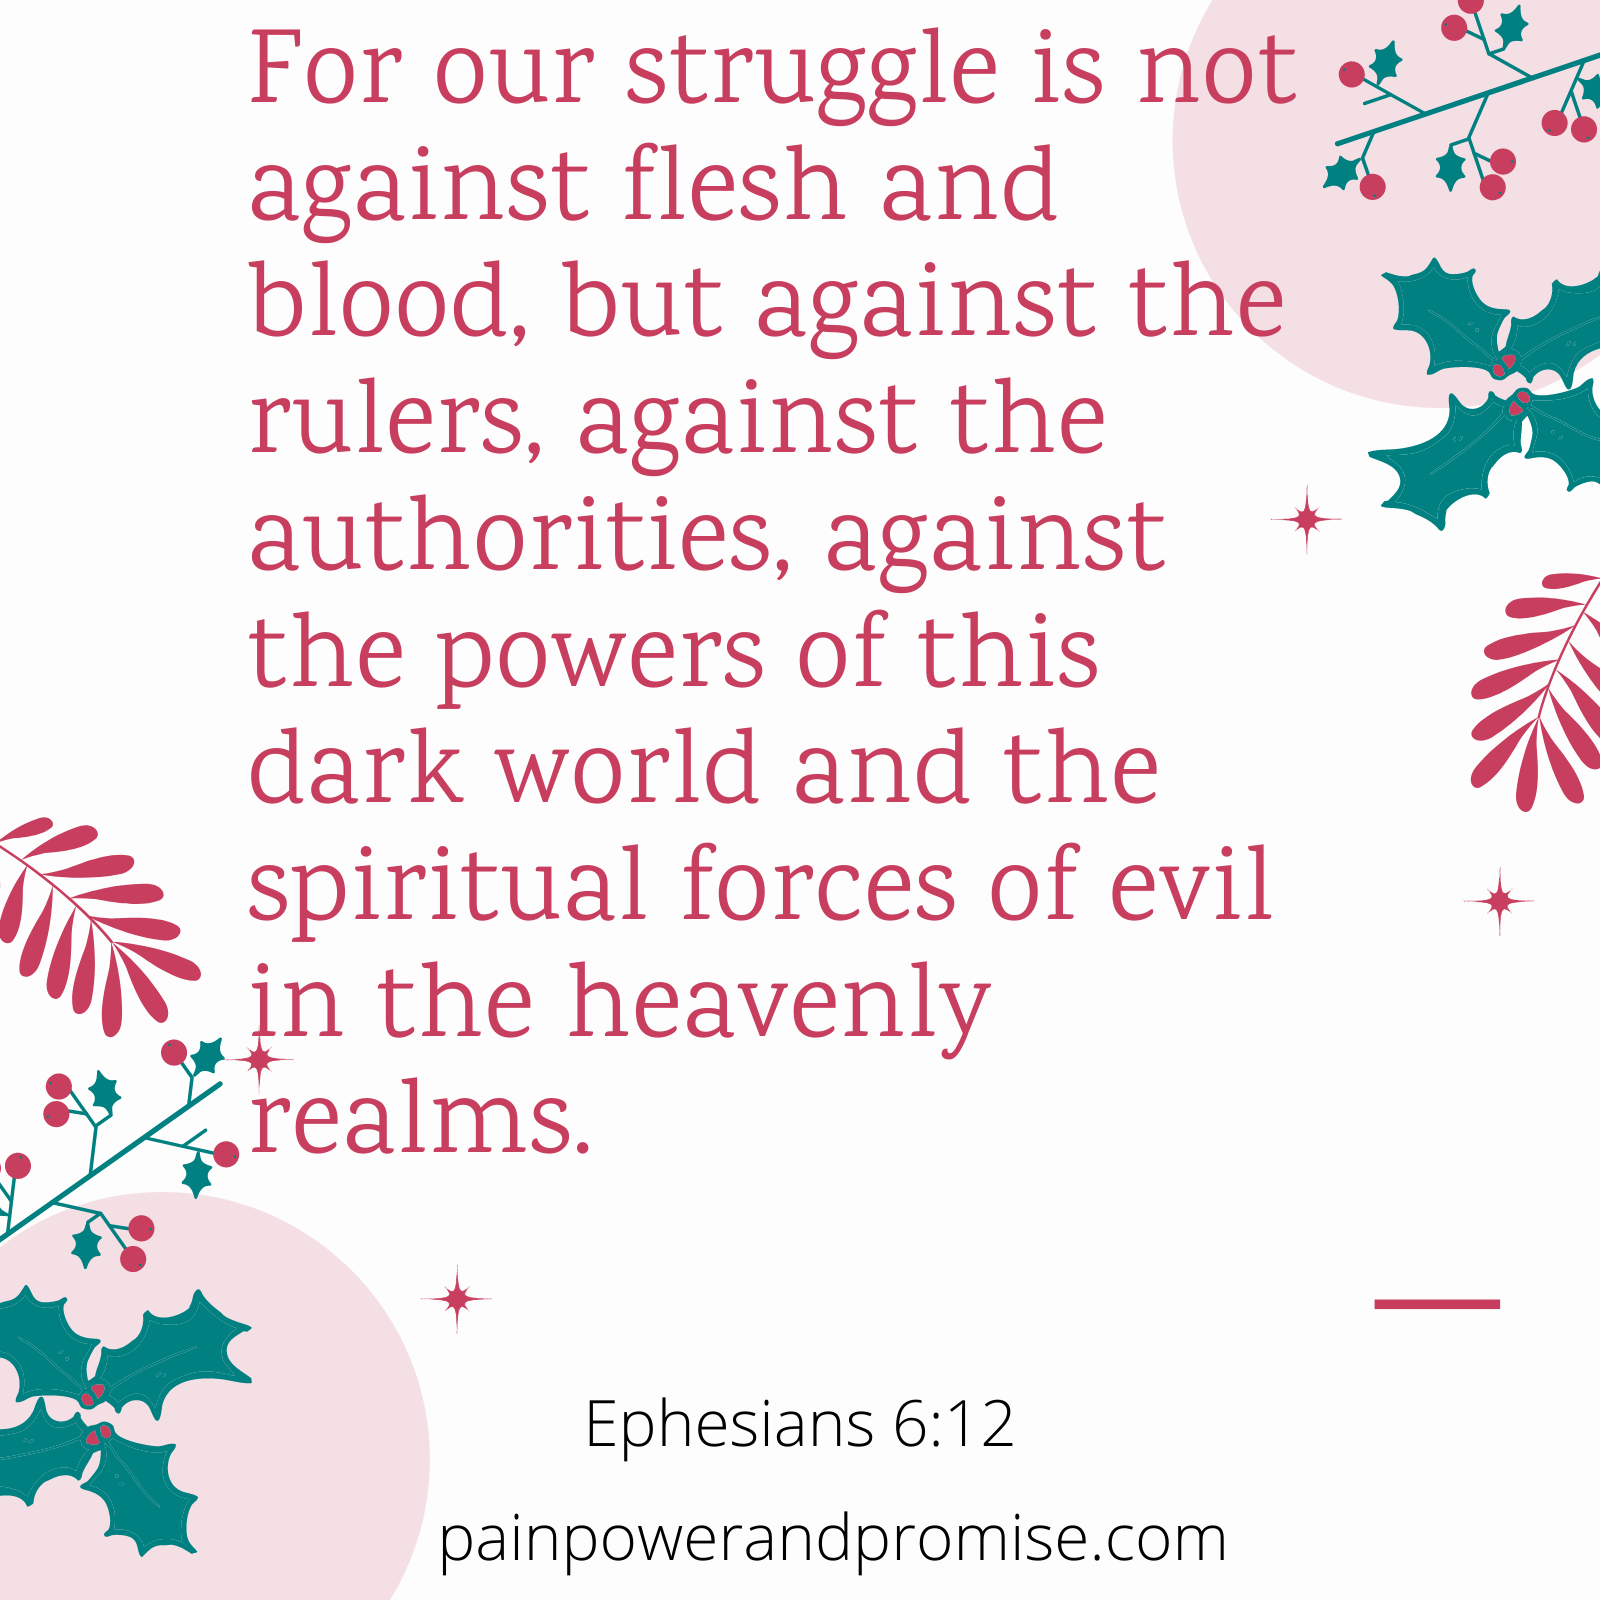 Scripture Inspirationa: For our struggle is not against flesh and blood, but against the rulers, against the authorities, against the powers of this dark world and the spiritual forces of evil in the heavently realms.